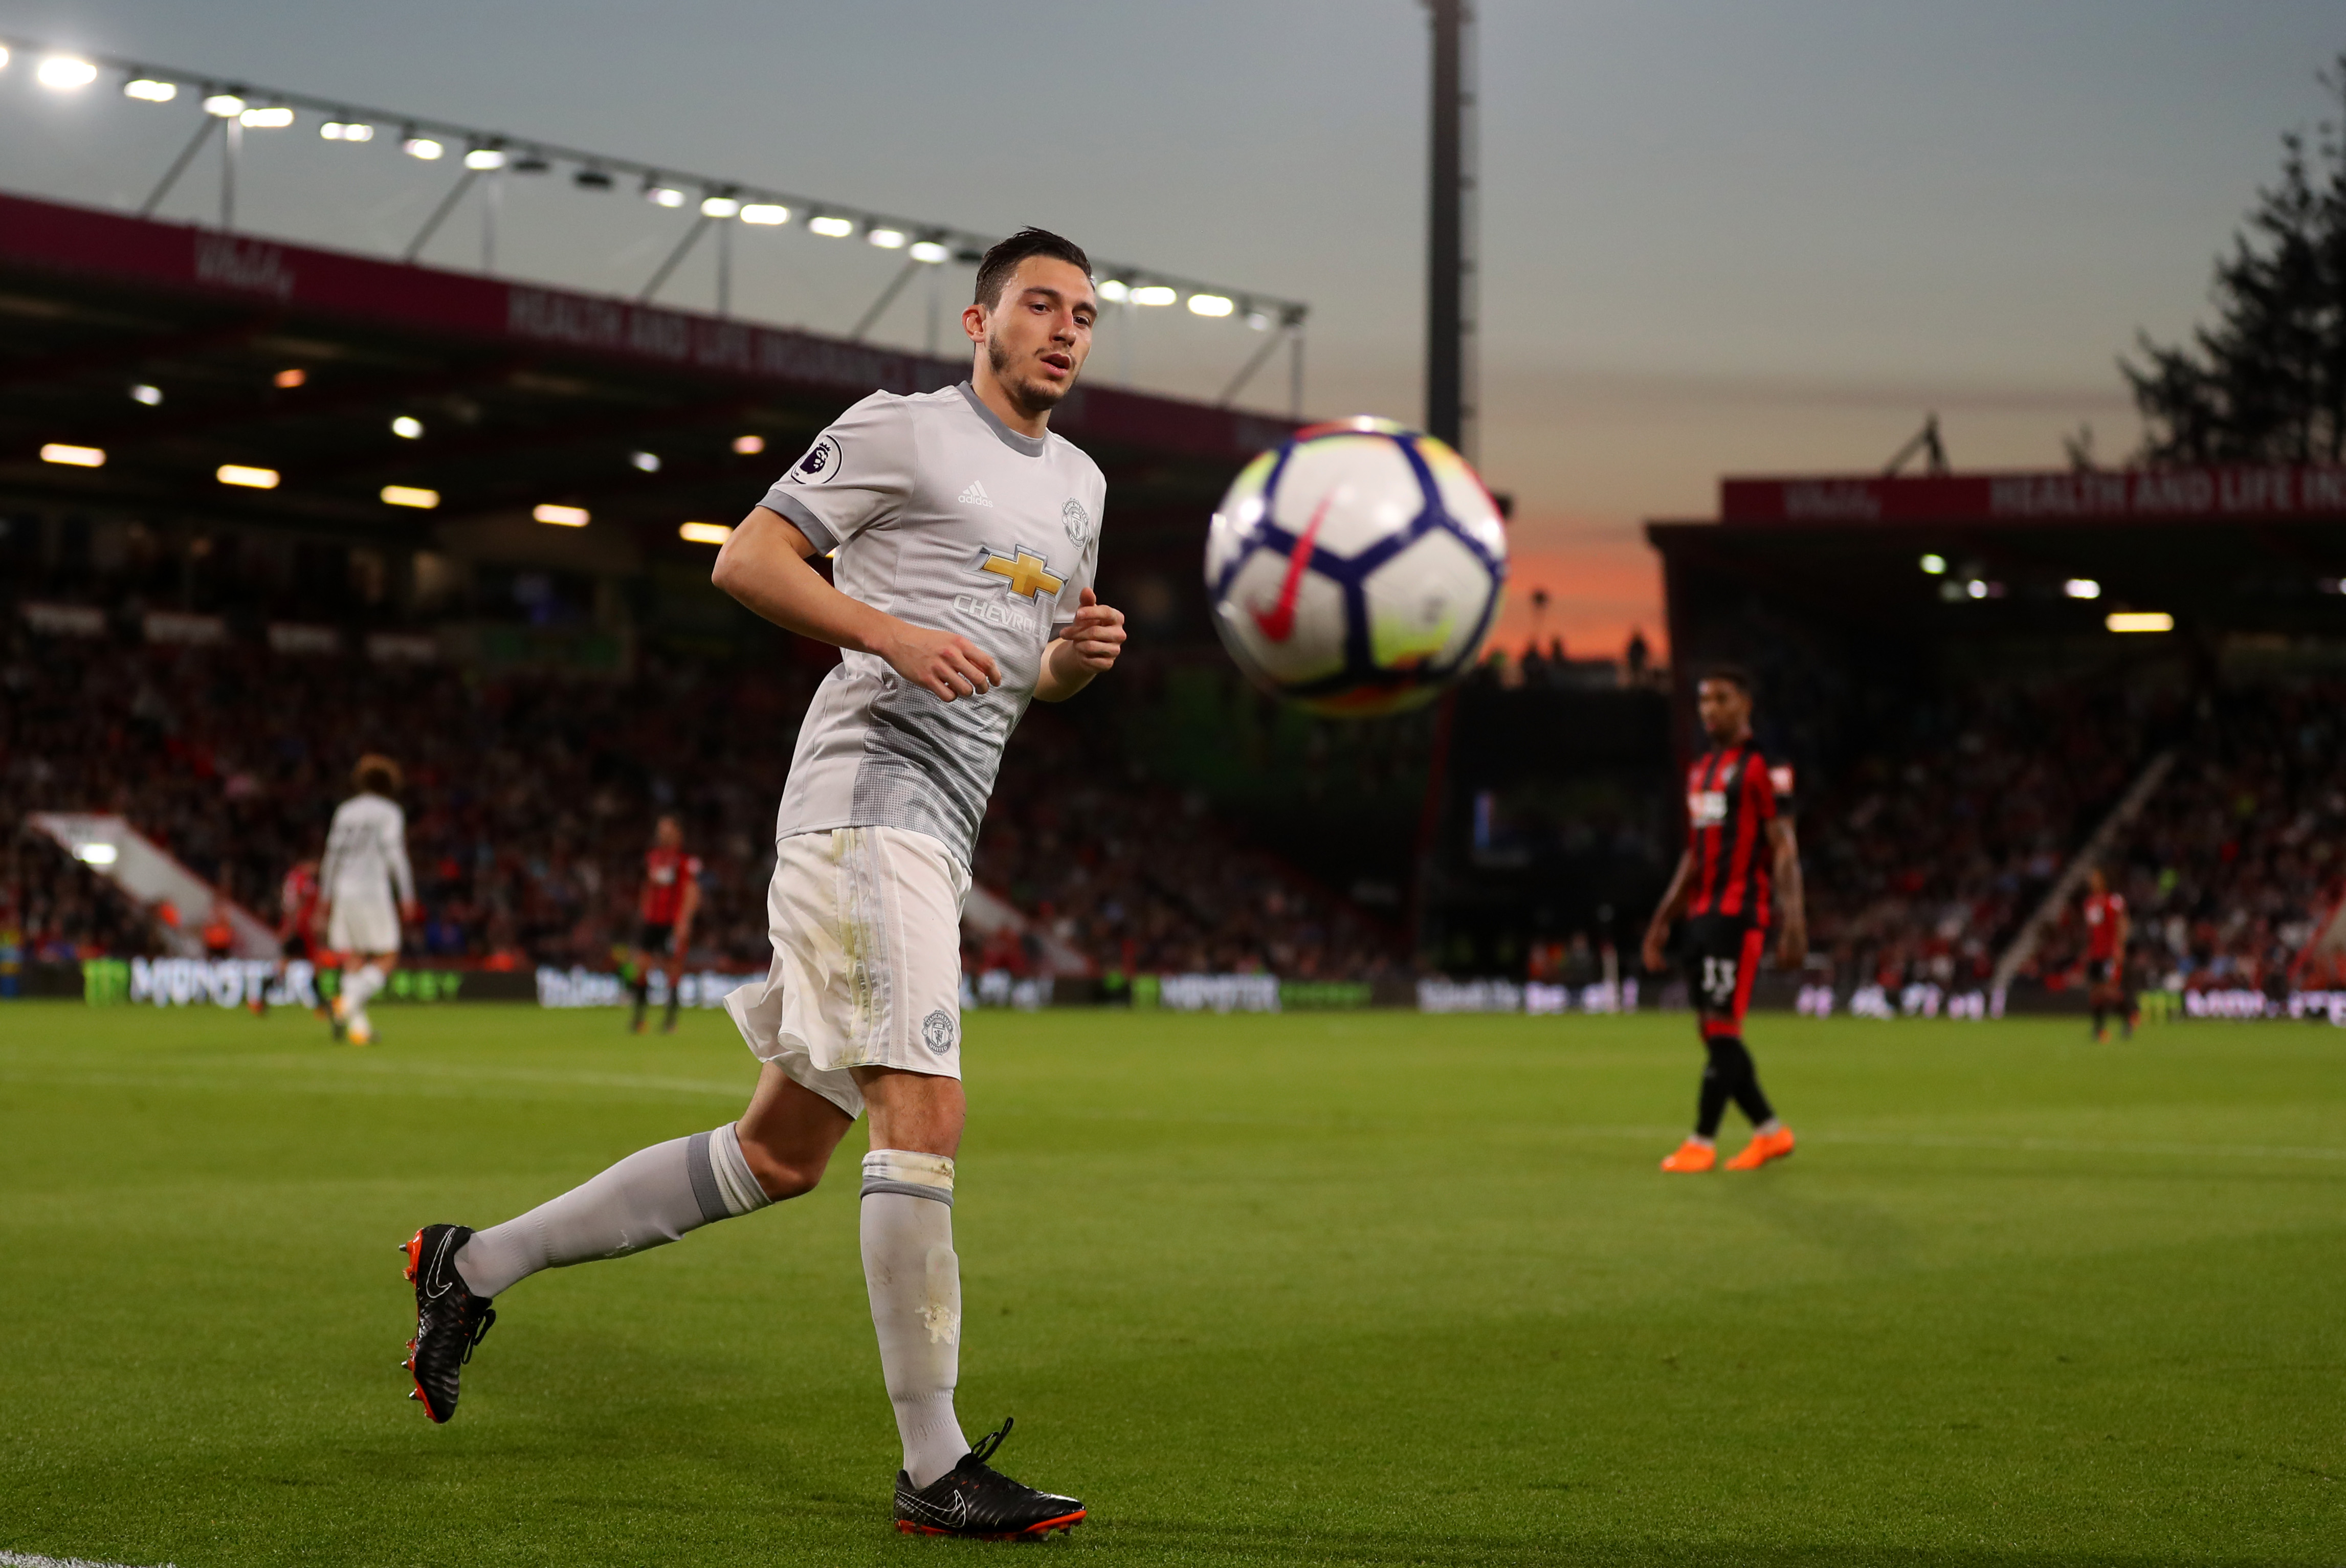 BOURNEMOUTH, ENGLAND - APRIL 18: Matteo Darmian of Manchester United during the Premier League match between AFC Bournemouth and Manchester United at Vitality Stadium on April 18, 2018 in Bournemouth, England. (Photo by Catherine Ivill/Getty Images)